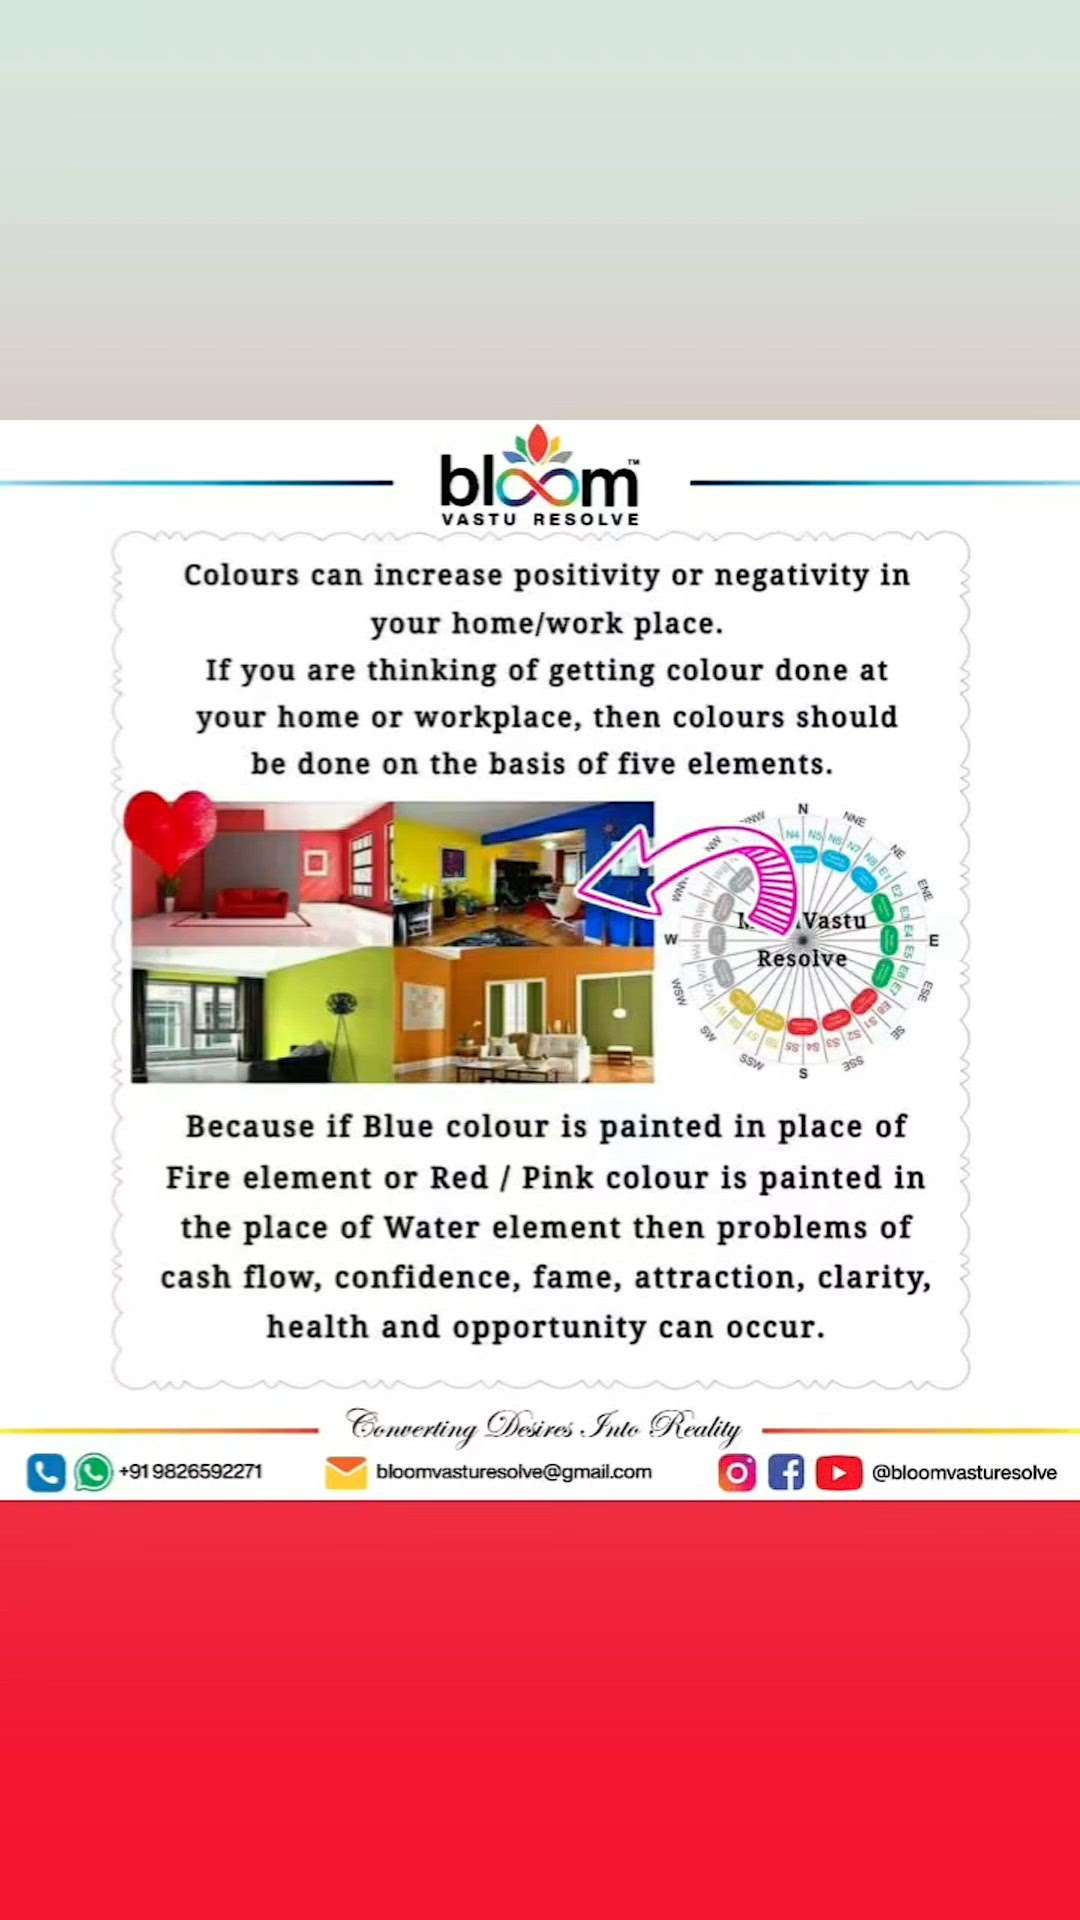 होली के पावन पर्व पर मंगलकामनाएं!💐🙏🏼Your queries and comments are always welcome.
For more Vastu please follow @bloomvasturesolve
on YouTube, Instagram & Facebook
.
.
For personal consultation, feel free to contact certified MahaVastu Expert through
M - 9826592271
Or
bloomvasturesolve@gmail.com
#vastu #वास्तु #mahavastu #mahavastuexpert #bloomvasturesolve  #vastureels #vastulogy #vastuexpert  #vasturemedies  #vastuforhome #vastuforpeace #vastudosh #numerology #holi #होली  #रंग #wallpainting